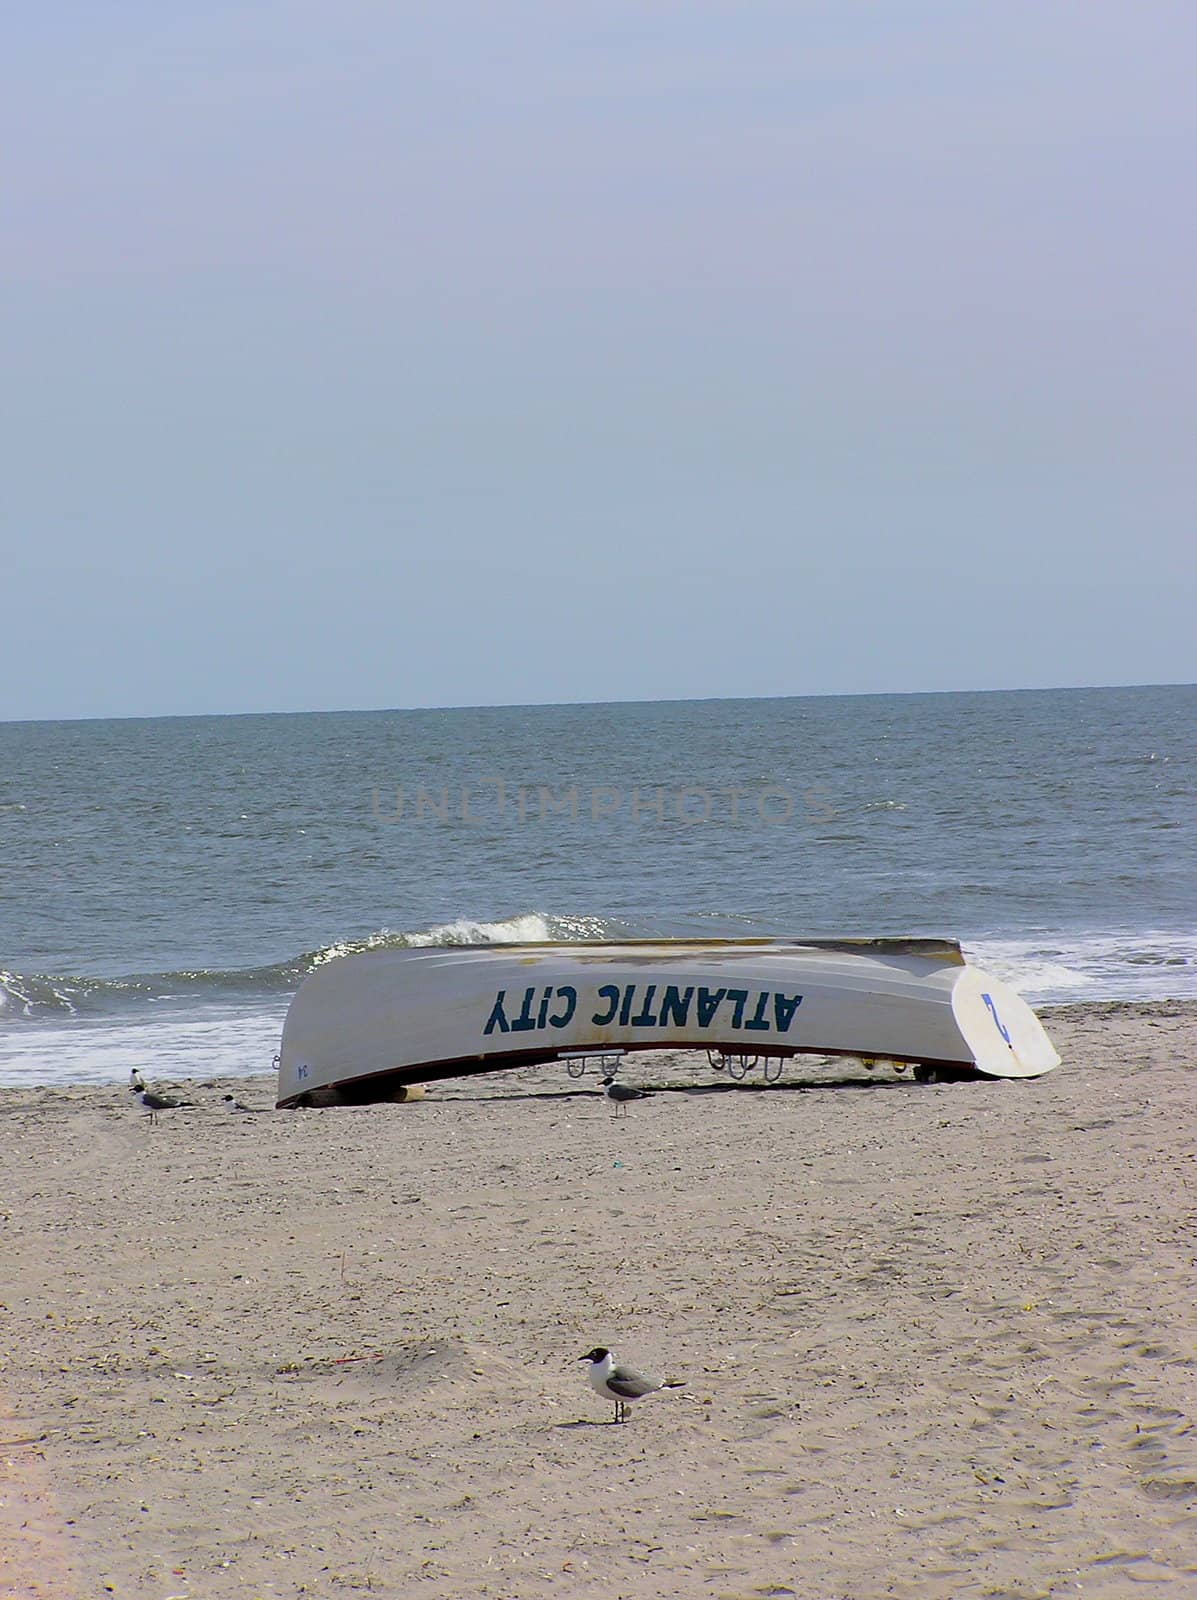 Atlantic City Lifeguard Boat by Ffooter